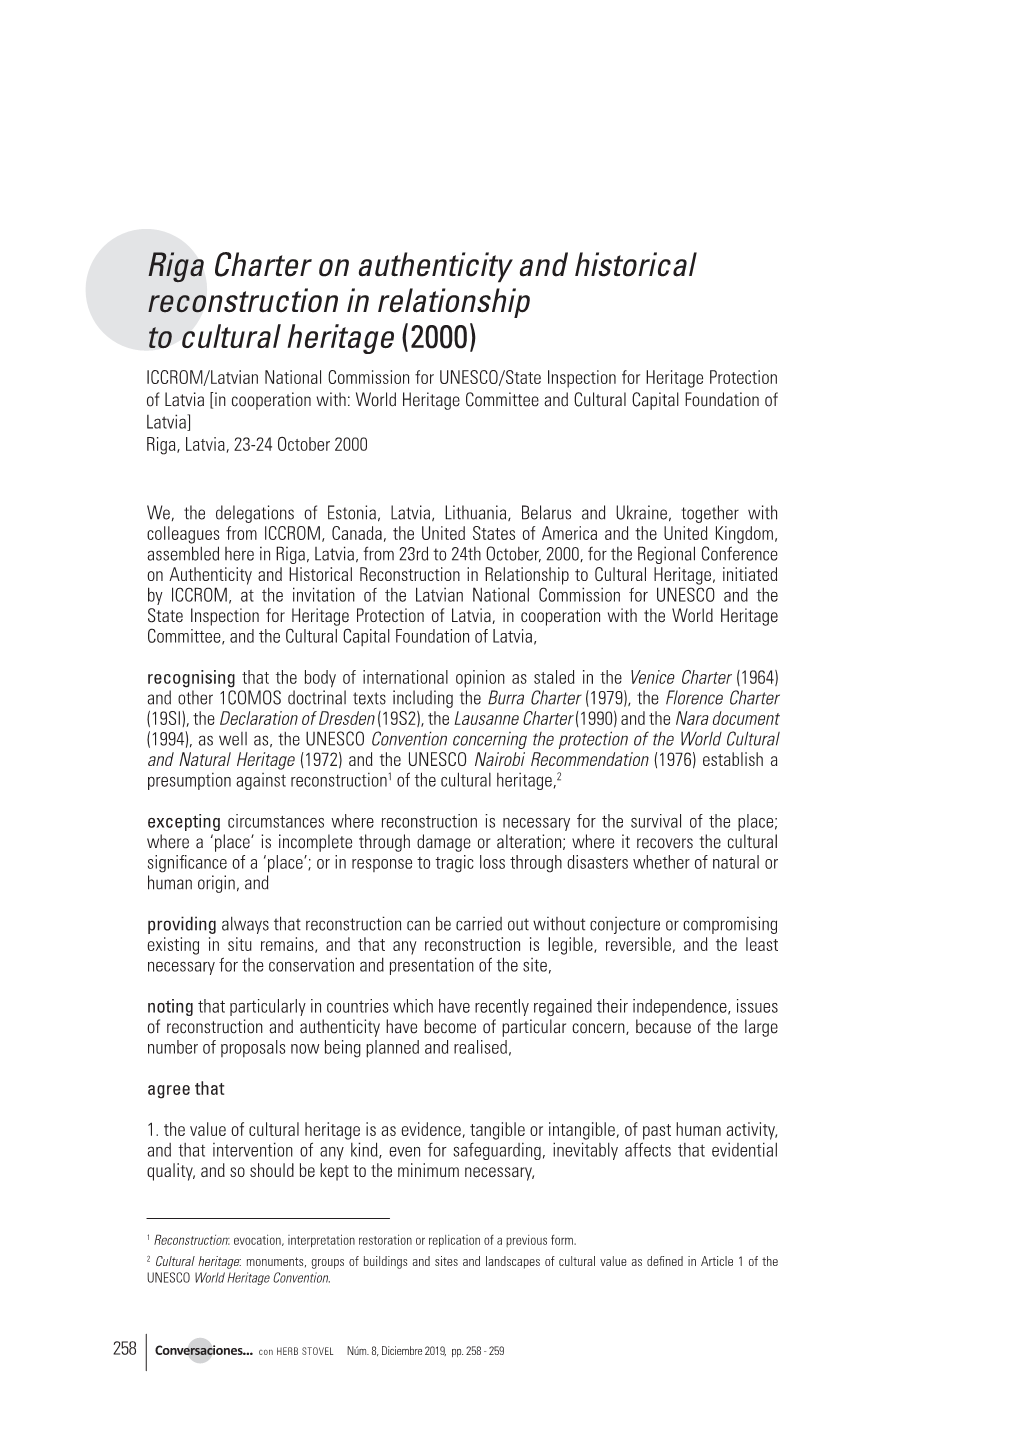 Riga Charter on Authenticity and Historical Reconstruction